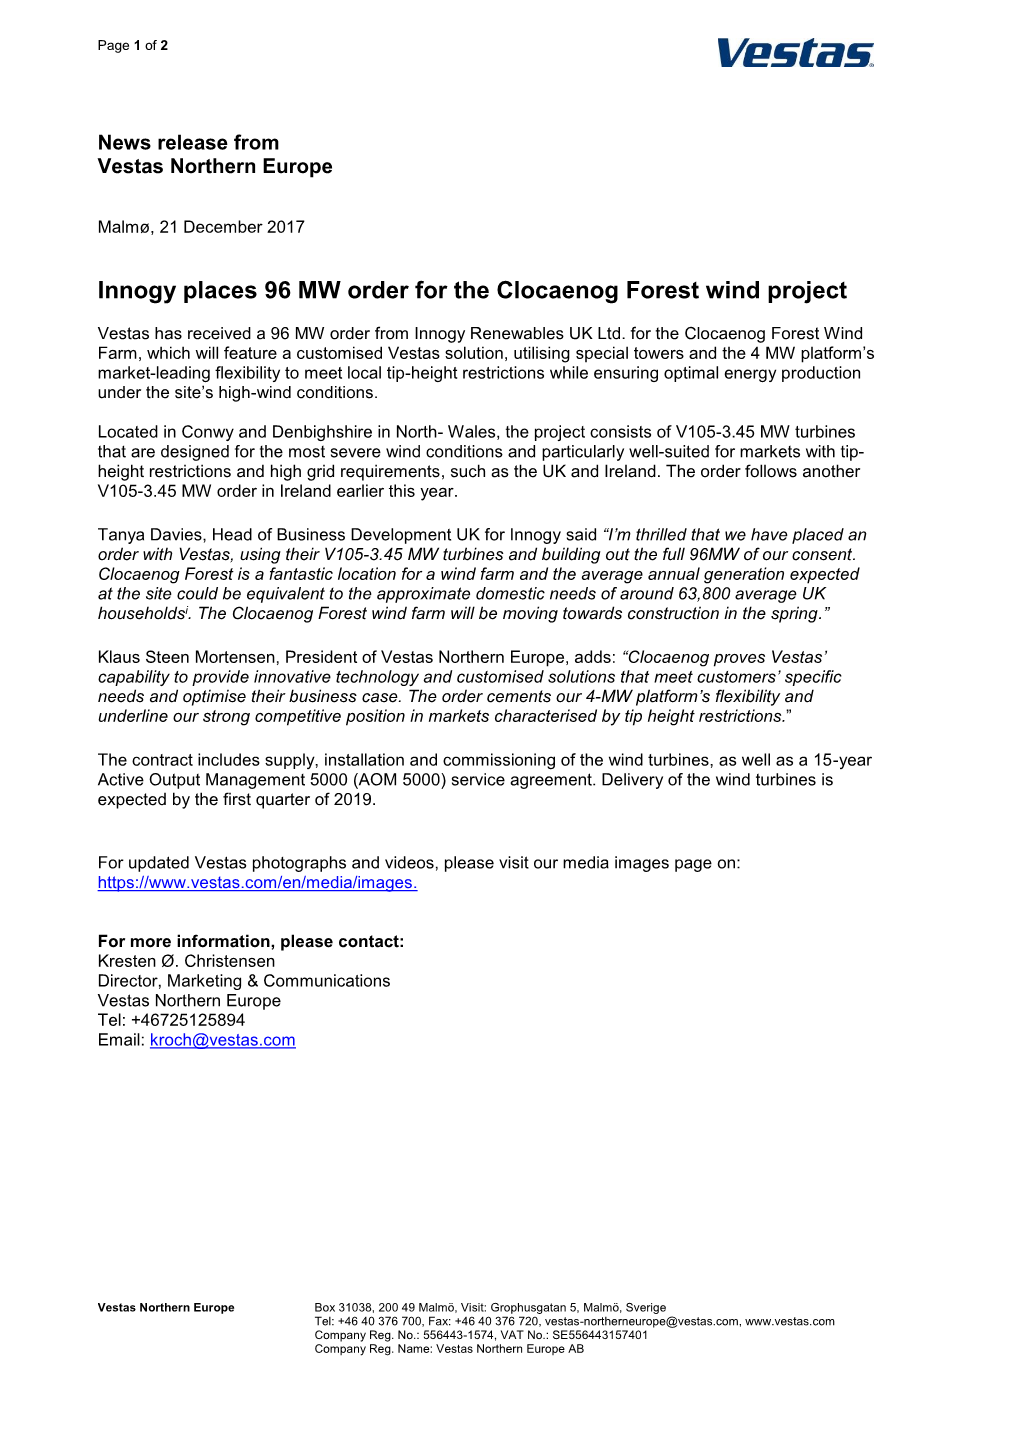 Innogy Places 96 MW Order for the Clocaenog Forest Wind Project